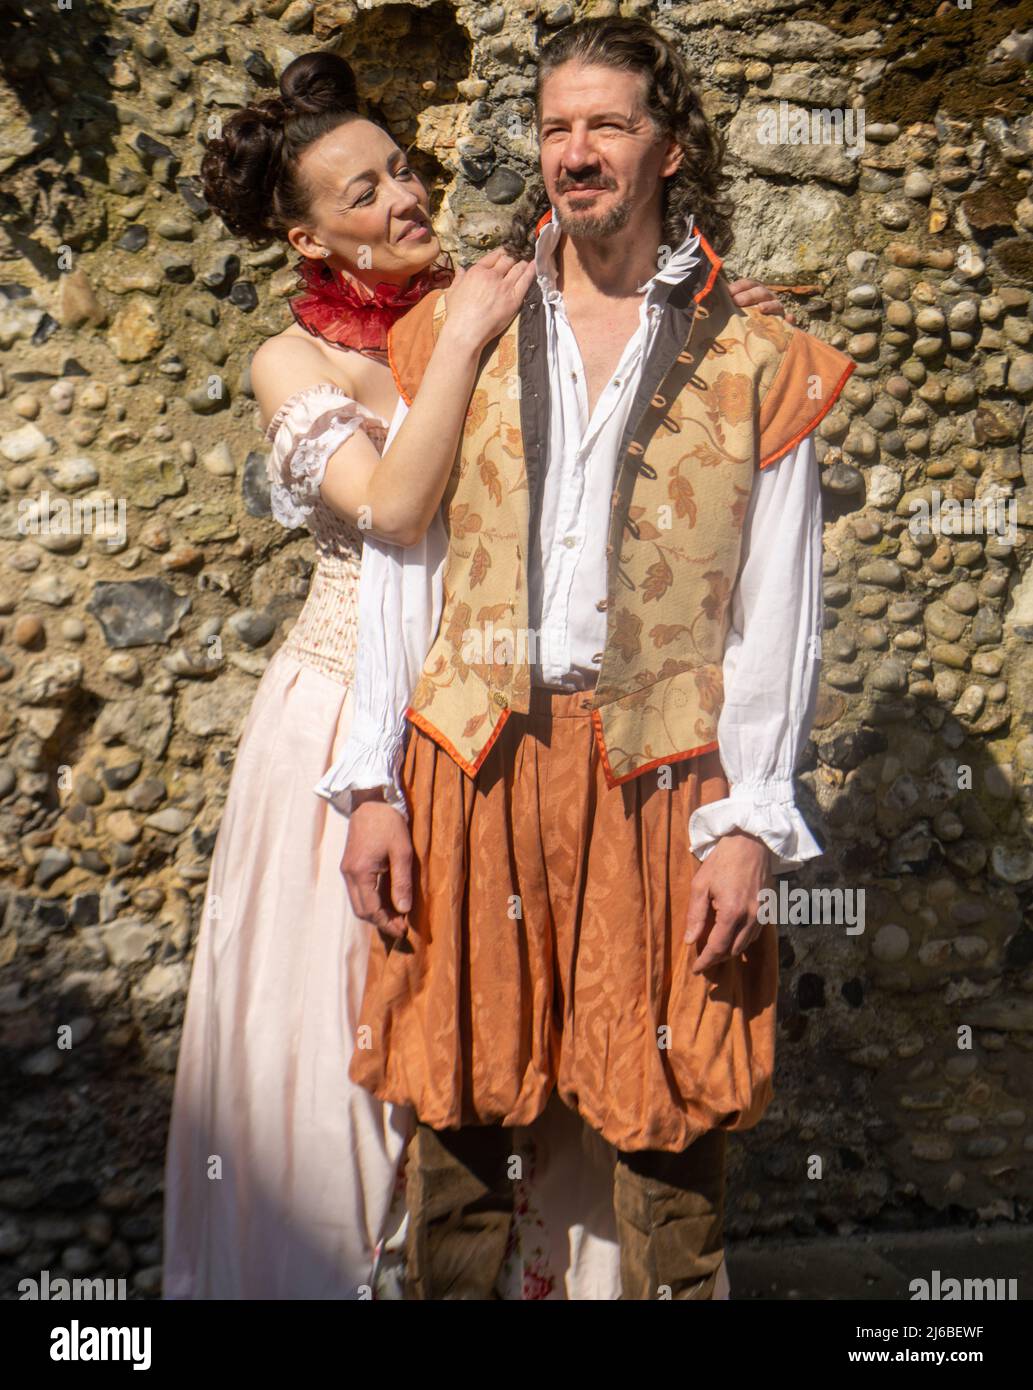 Brentwood Essex 30th Apr. 2022 Shakespeare in Love photo call, with Darren Matthews and Jen Bell, Produced by Early Doors,  Brentwood Essex Credit Ian DavidsonAlamy Live News Stock Photo